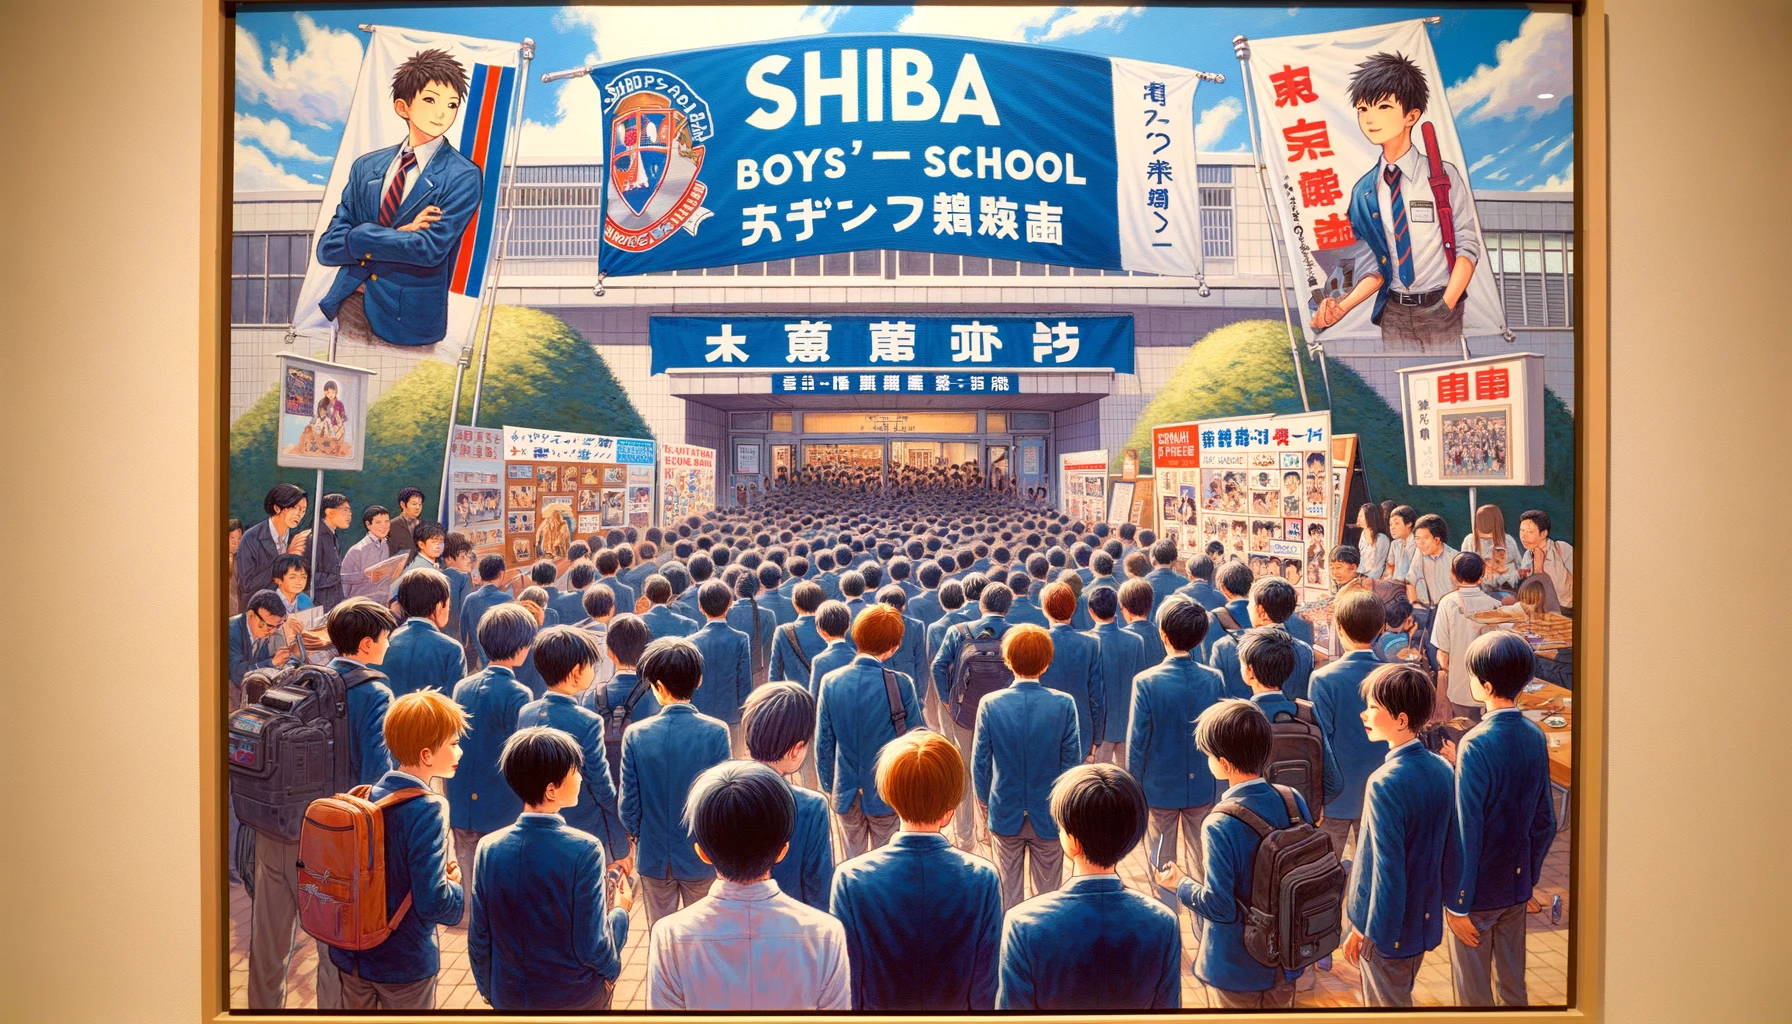 A vibrant scene at SHIBA Boys' Middle School capturing its popularity. The image shows the school entrance with a crowd of male students and parents during an open school day. Banners with the school's name 'SHIBA' welcome the visitors, and students are shown in various activities like tours, presentations, and interactive displays, showcasing the lively and appealing atmosphere of the school.